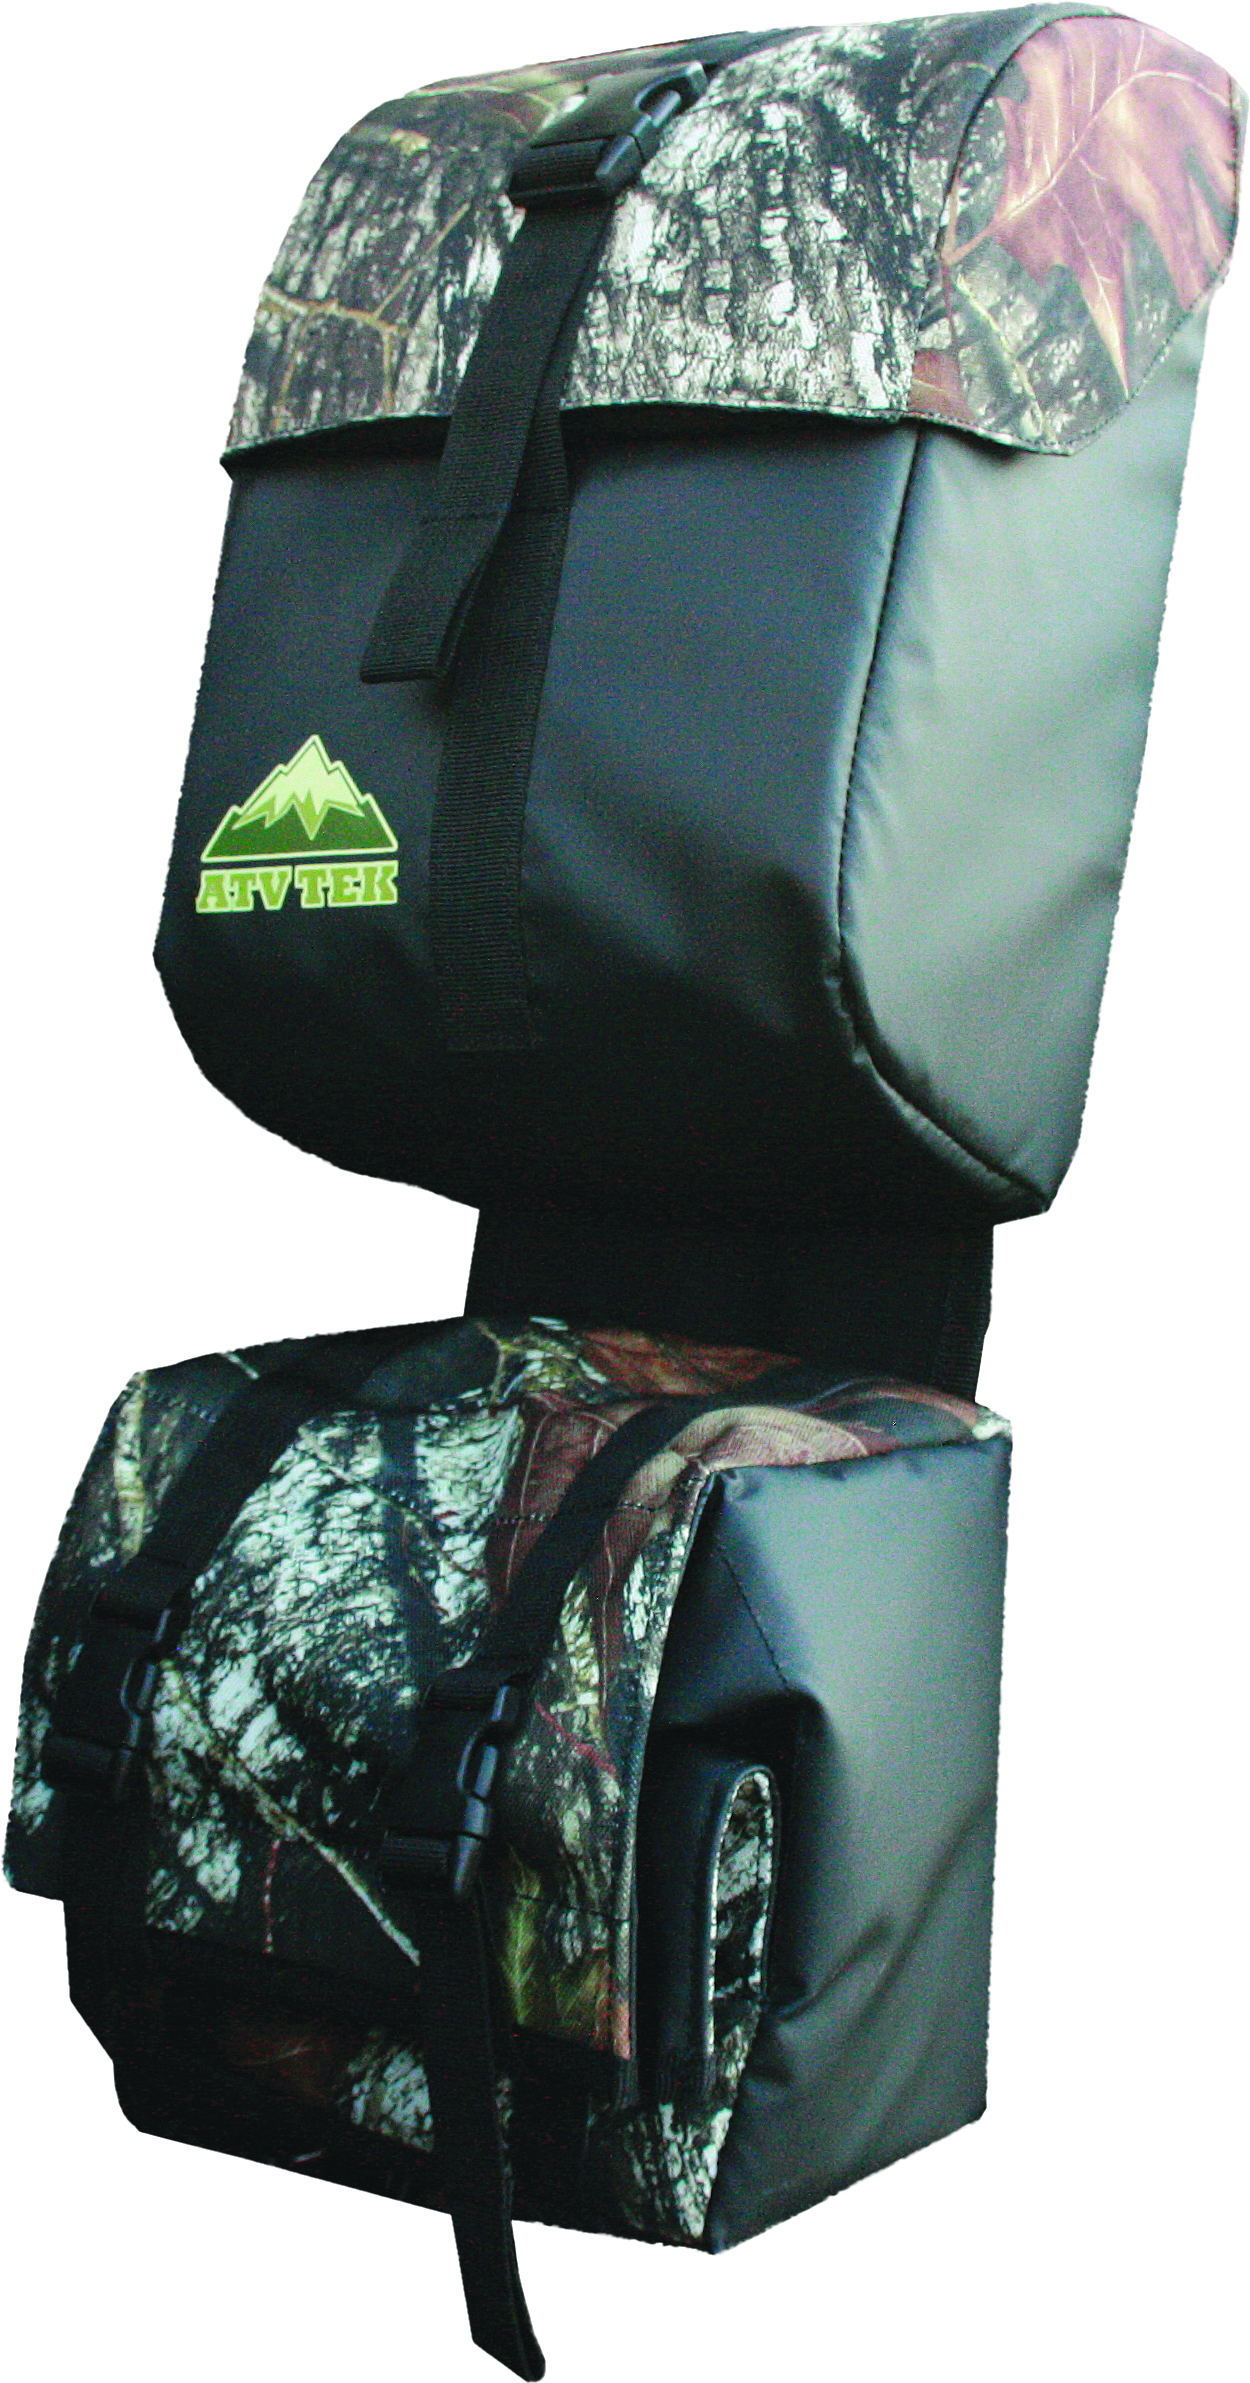 Arch Fender Bag Camouflage - Click Image to Close